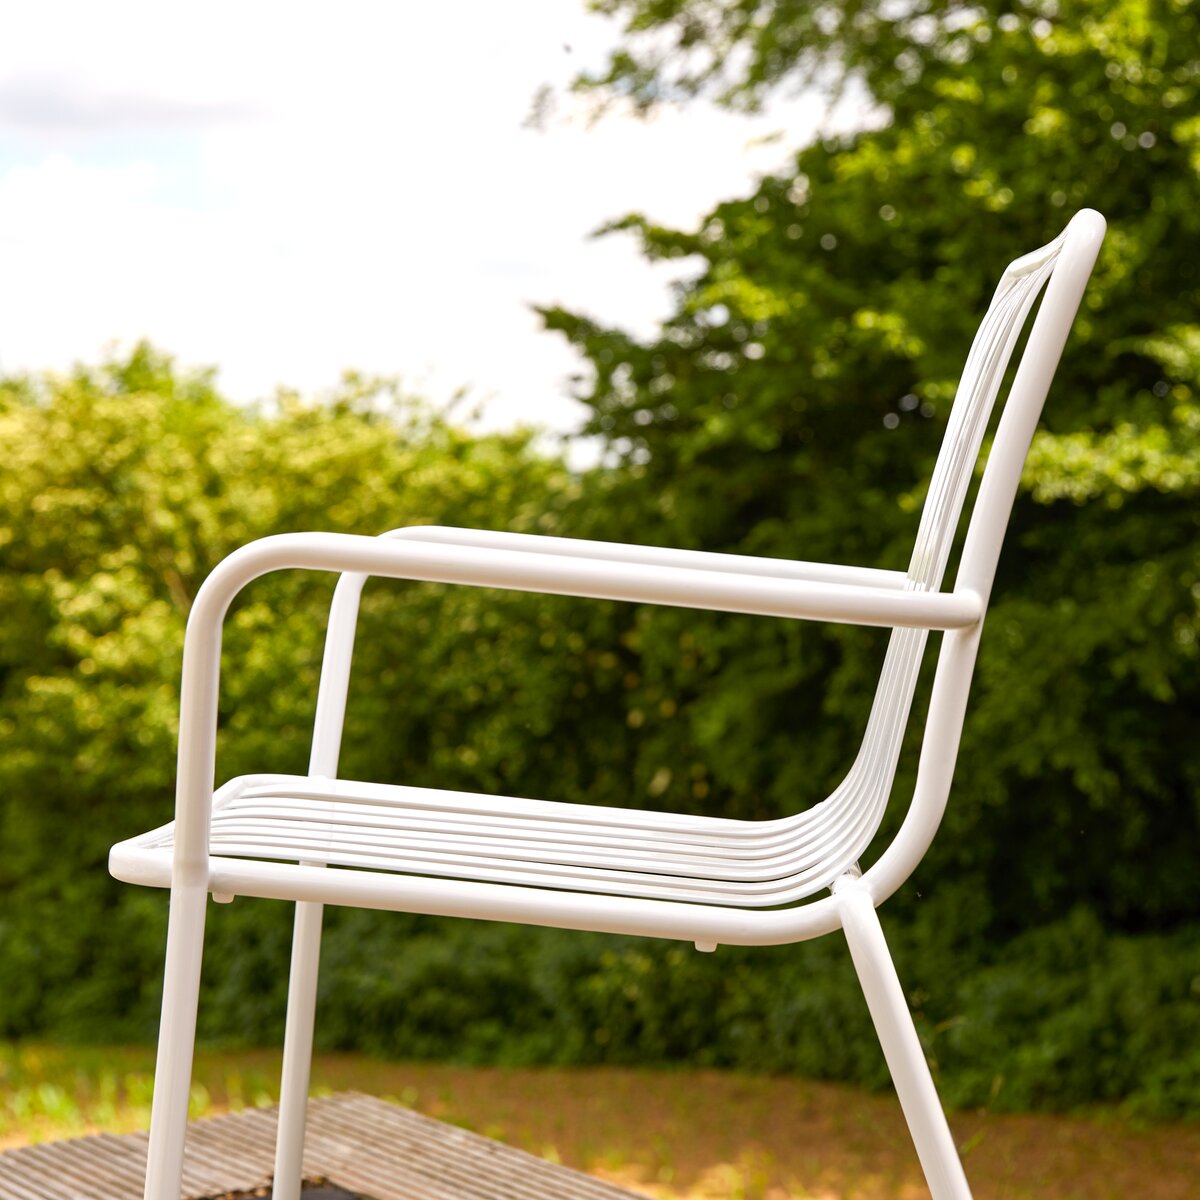 White metal chair with armrests - Garden furniture - Tikamoon